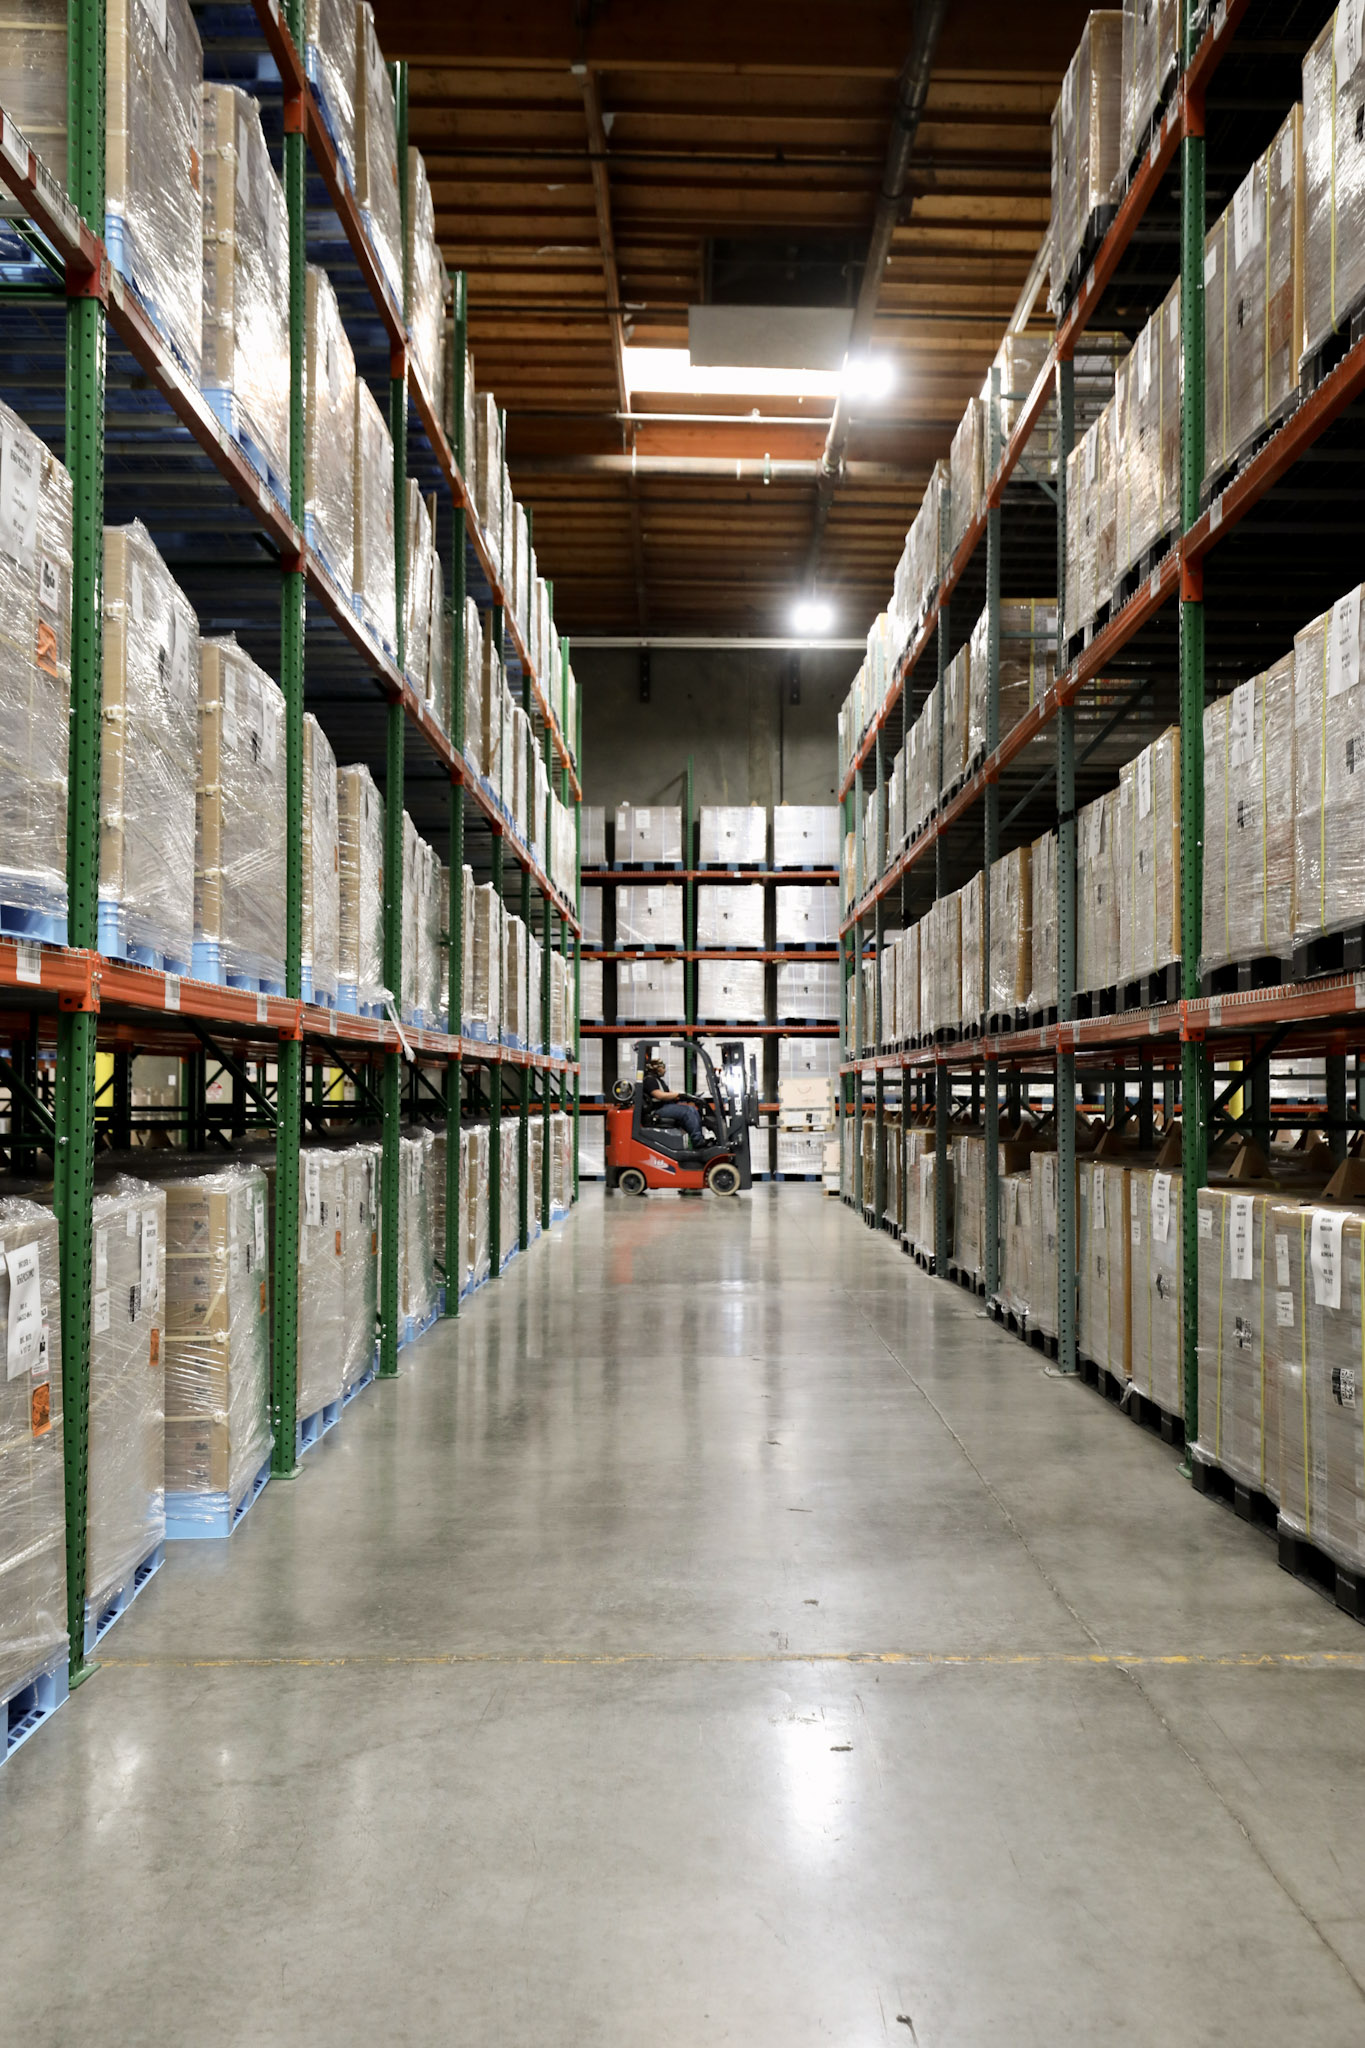 How to Find the Right Fulfillment Partner to Make Sure Shipments Get Out Quickly